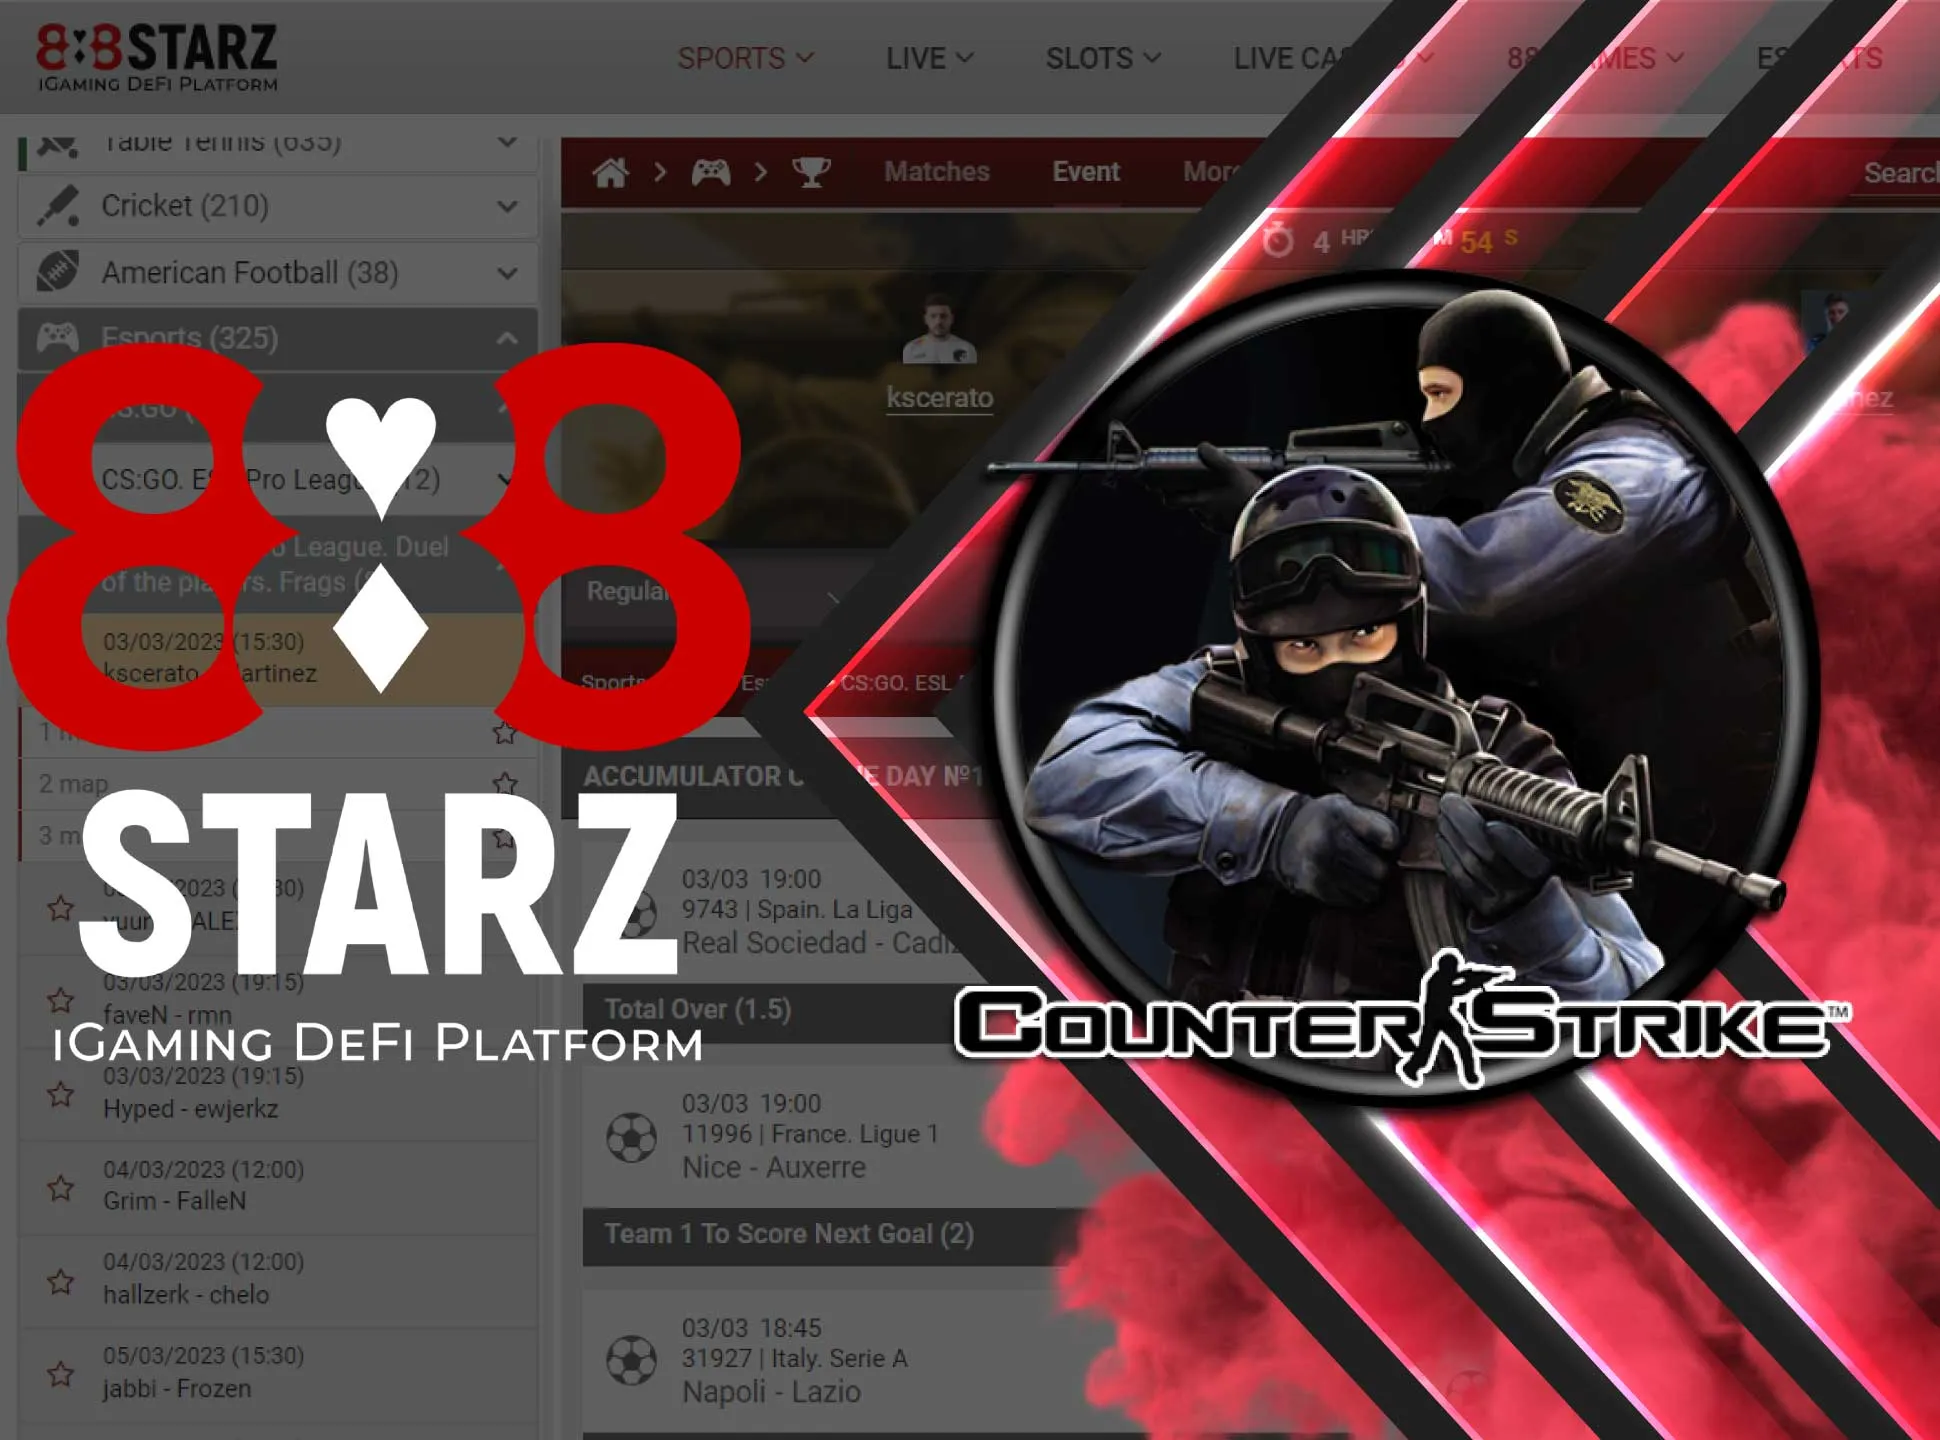 Watch the CS:GO matches on the 888starz website and place a bet on it.